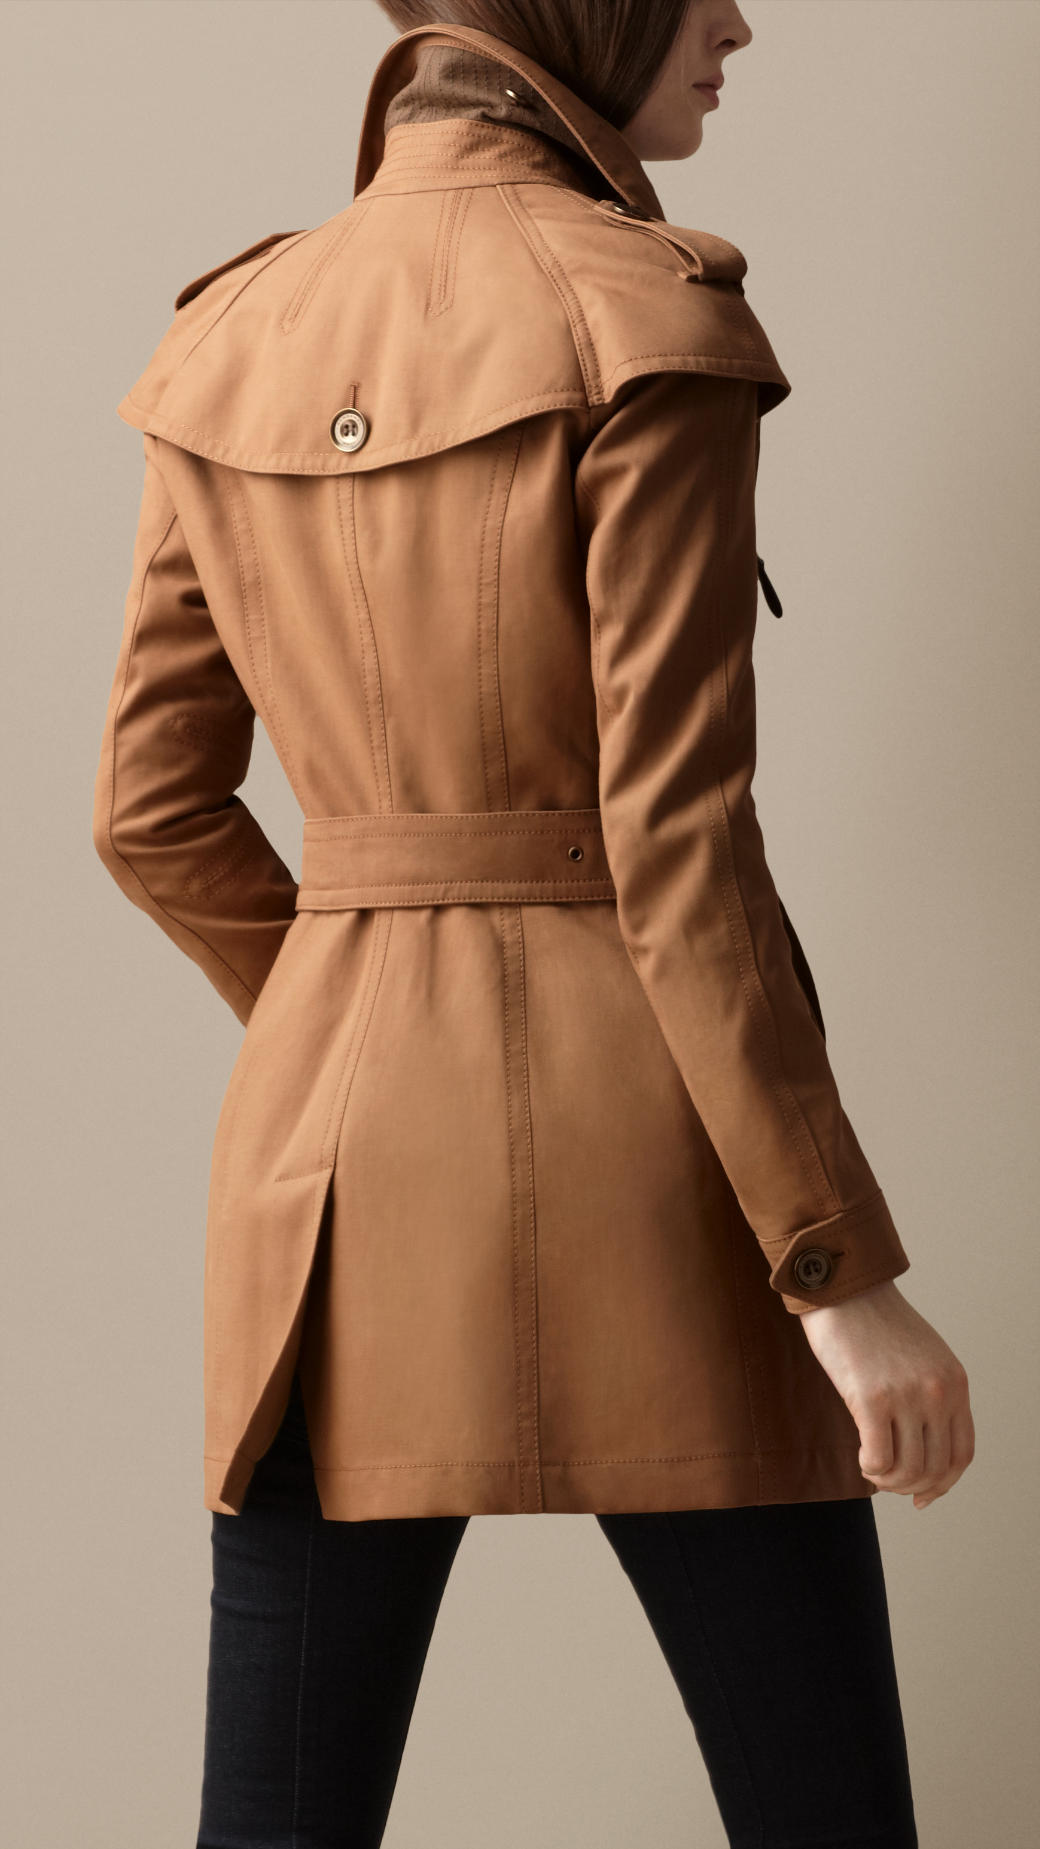 Burberry Cape Detail Trench Coat in Brown - Lyst